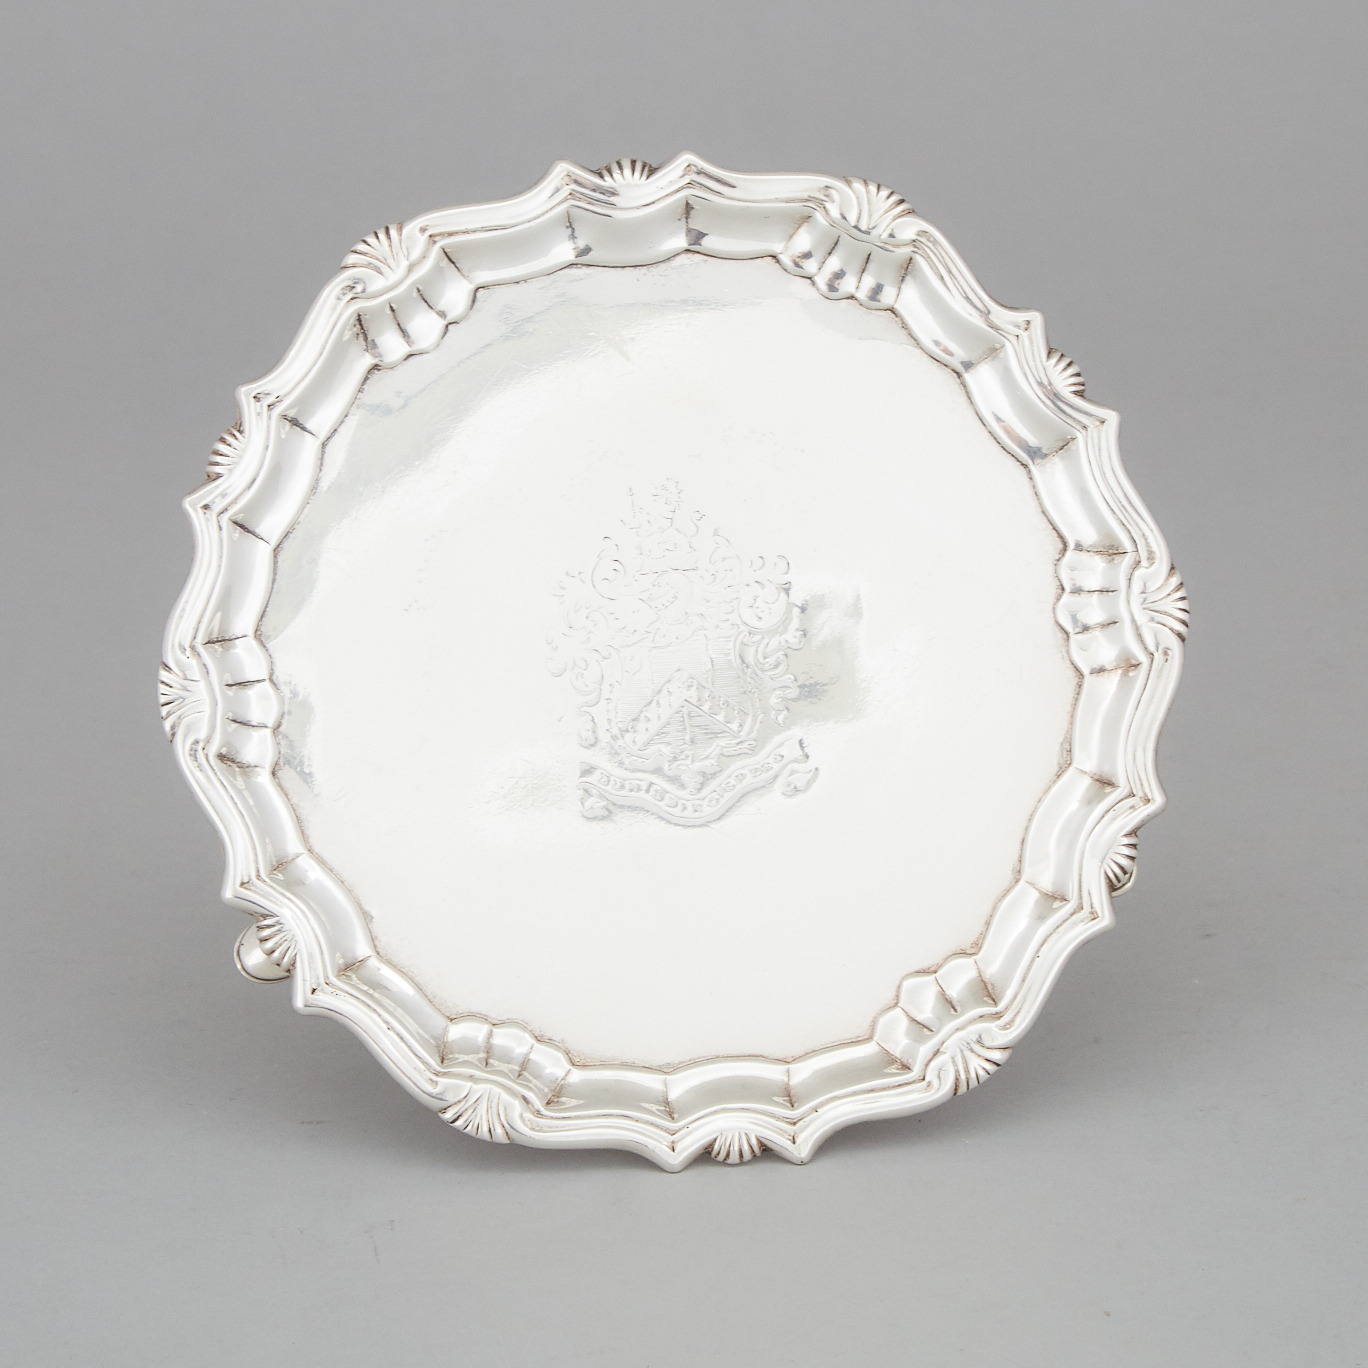 George II Silver Small Salver, Robert Abercromby, London, 1741